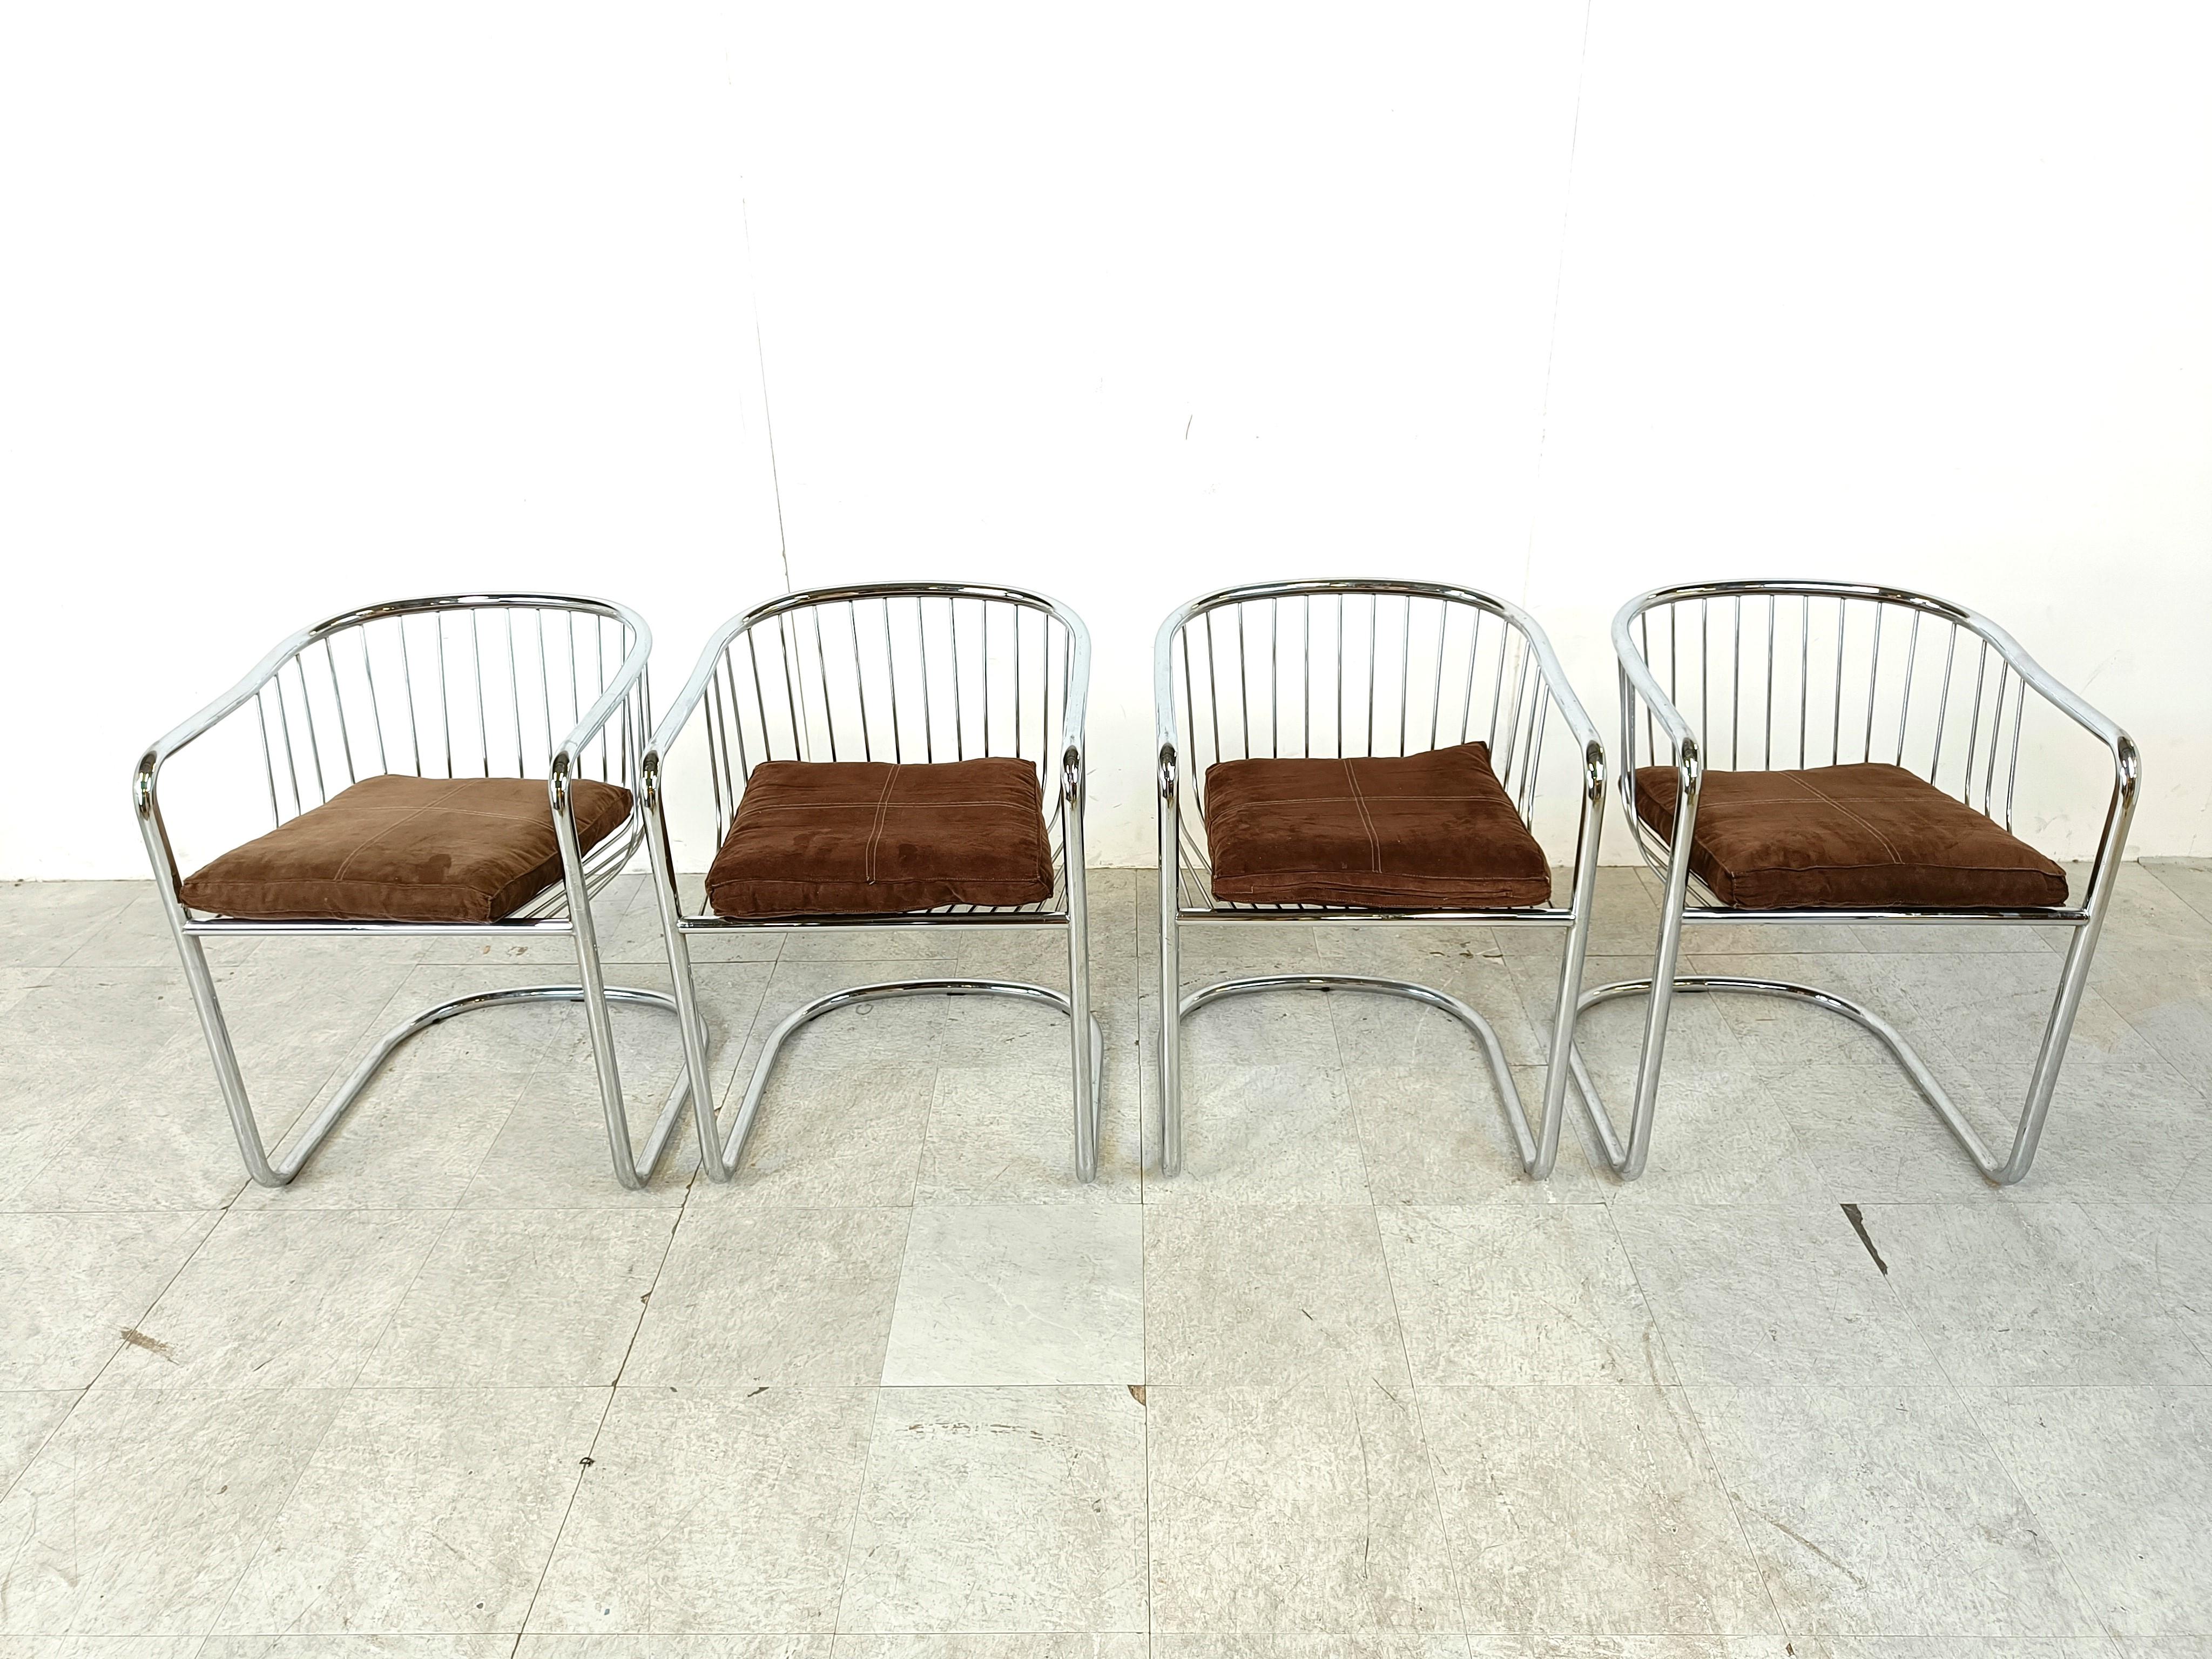 Seventies chromed tubular and chrome wire metal dining chairs with a cantilever base.

These German made dining chairs are often attributed to Gastone Rinaldi.

The cantilever design and the use of tubular chrome dates back to the 1920s - Bauhaus